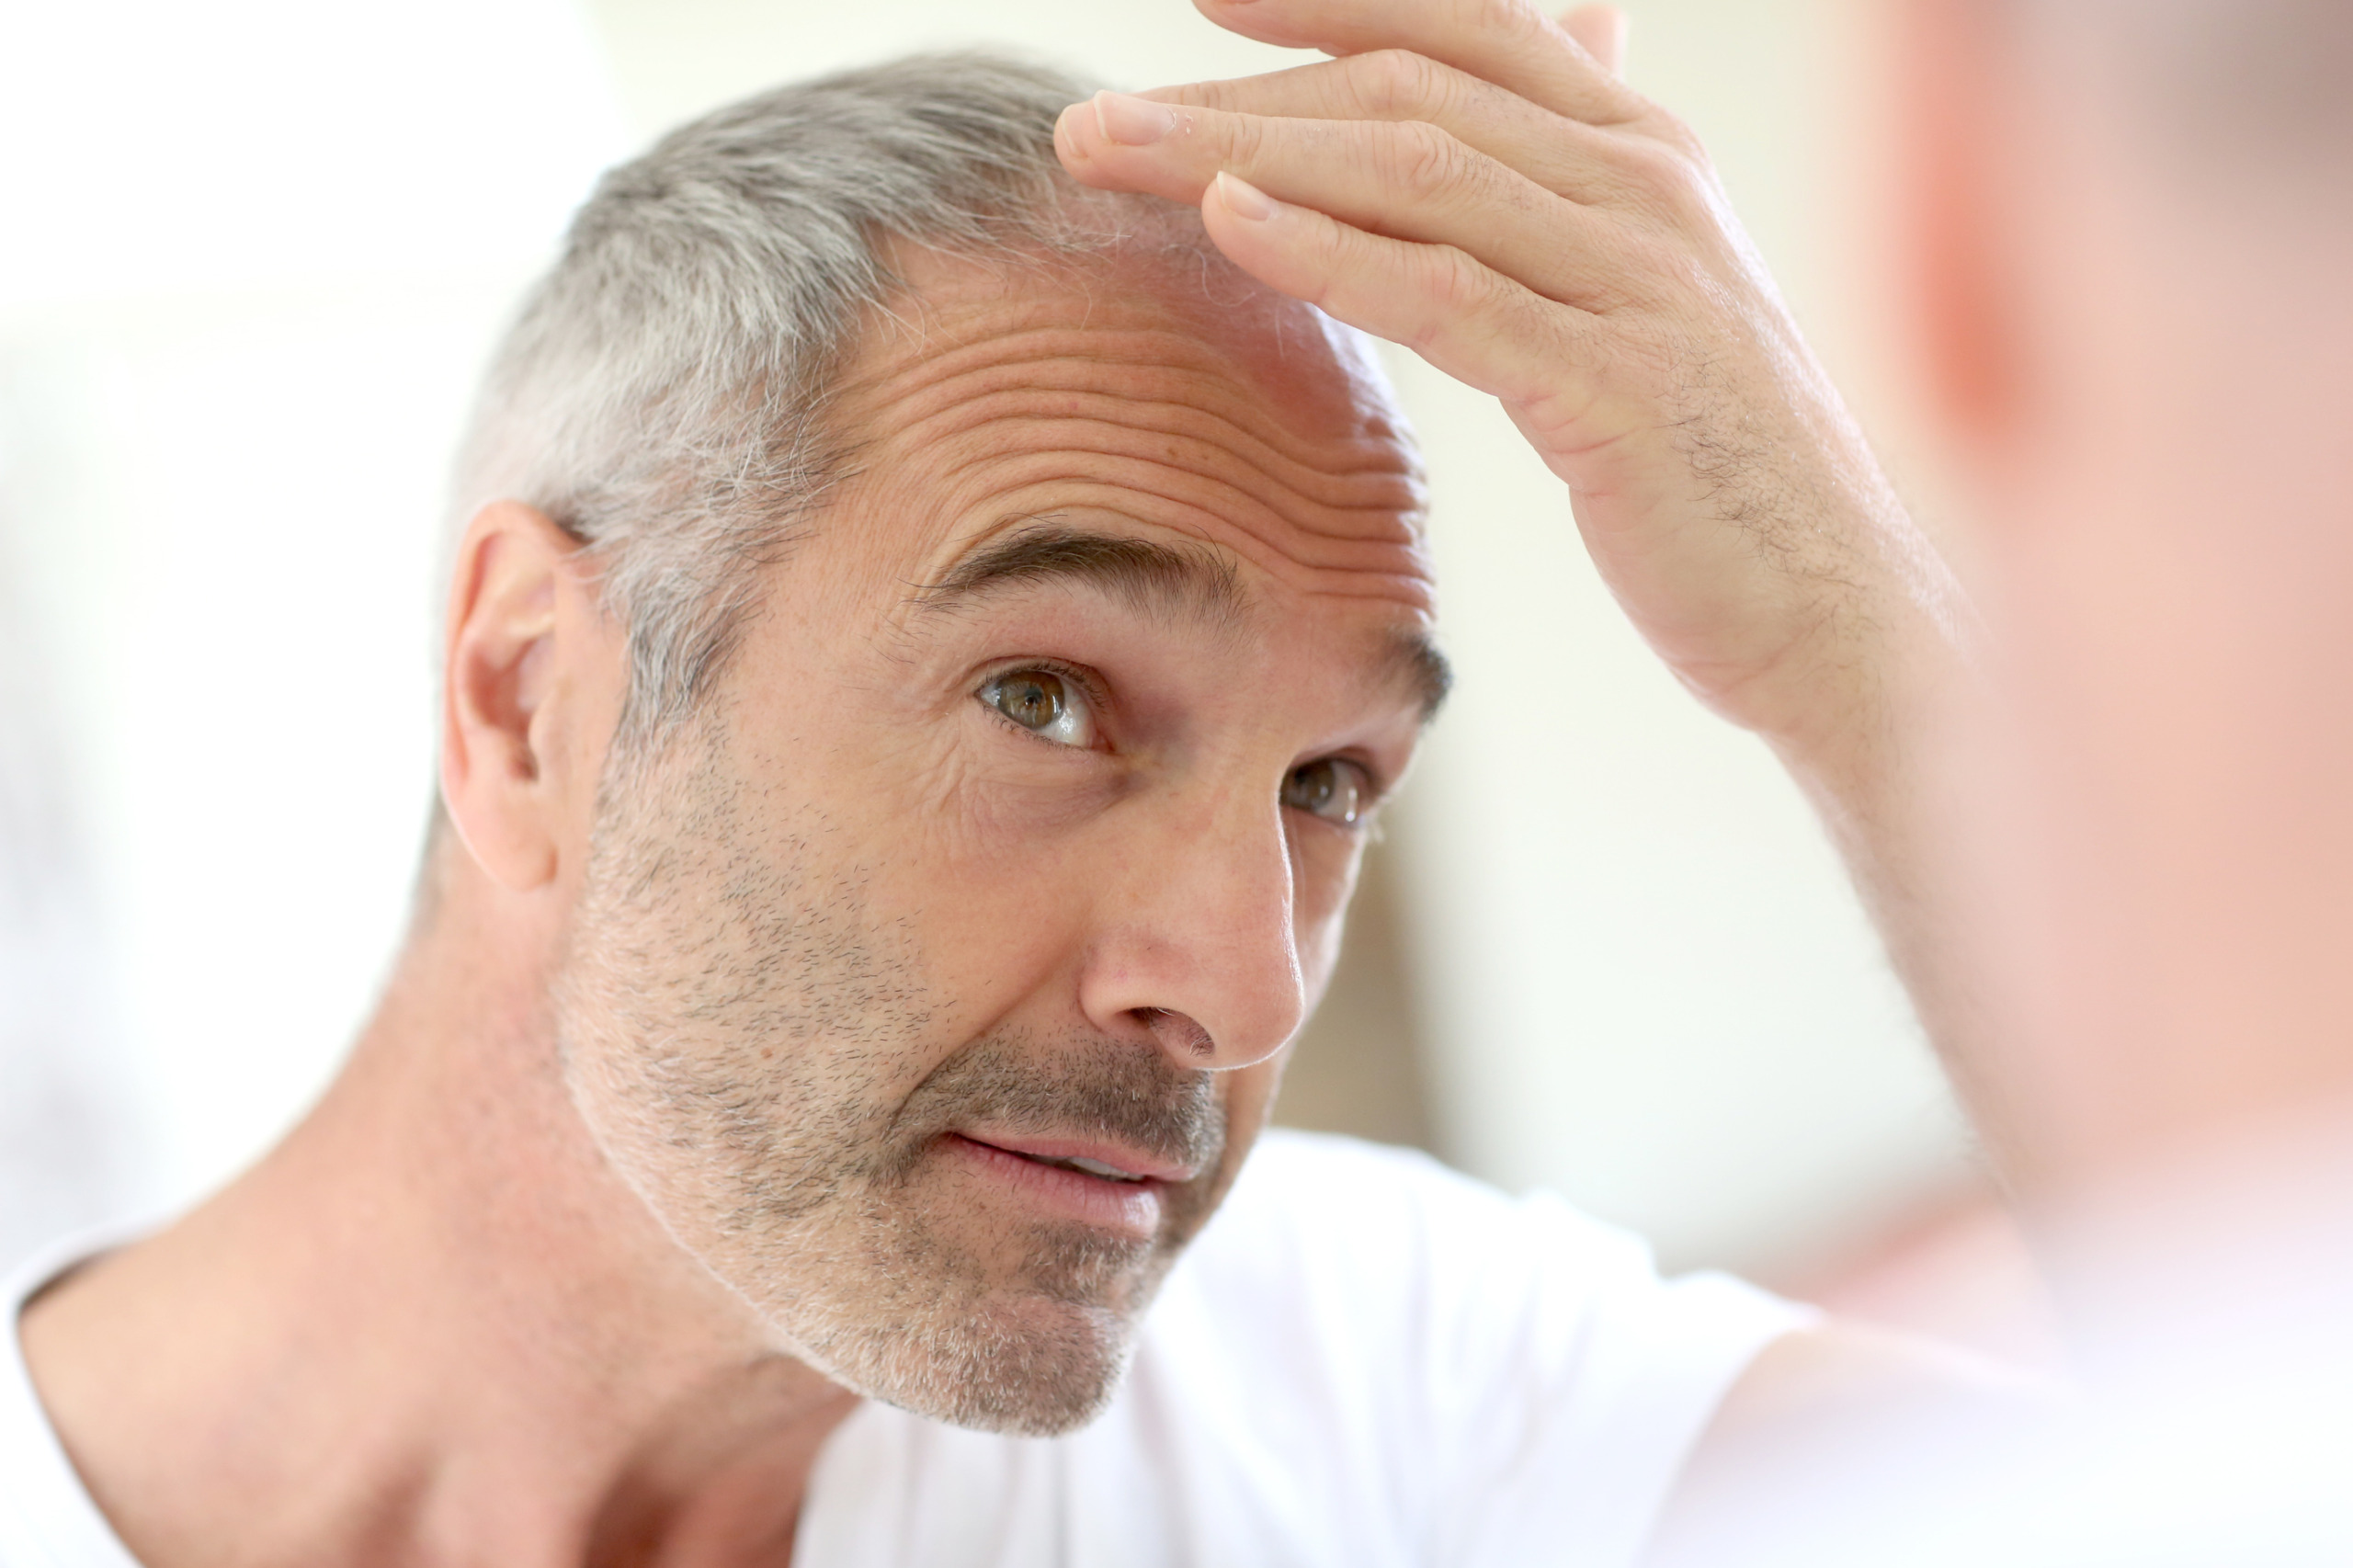 7 Ways Magnesium Can Prevent Hair Loss